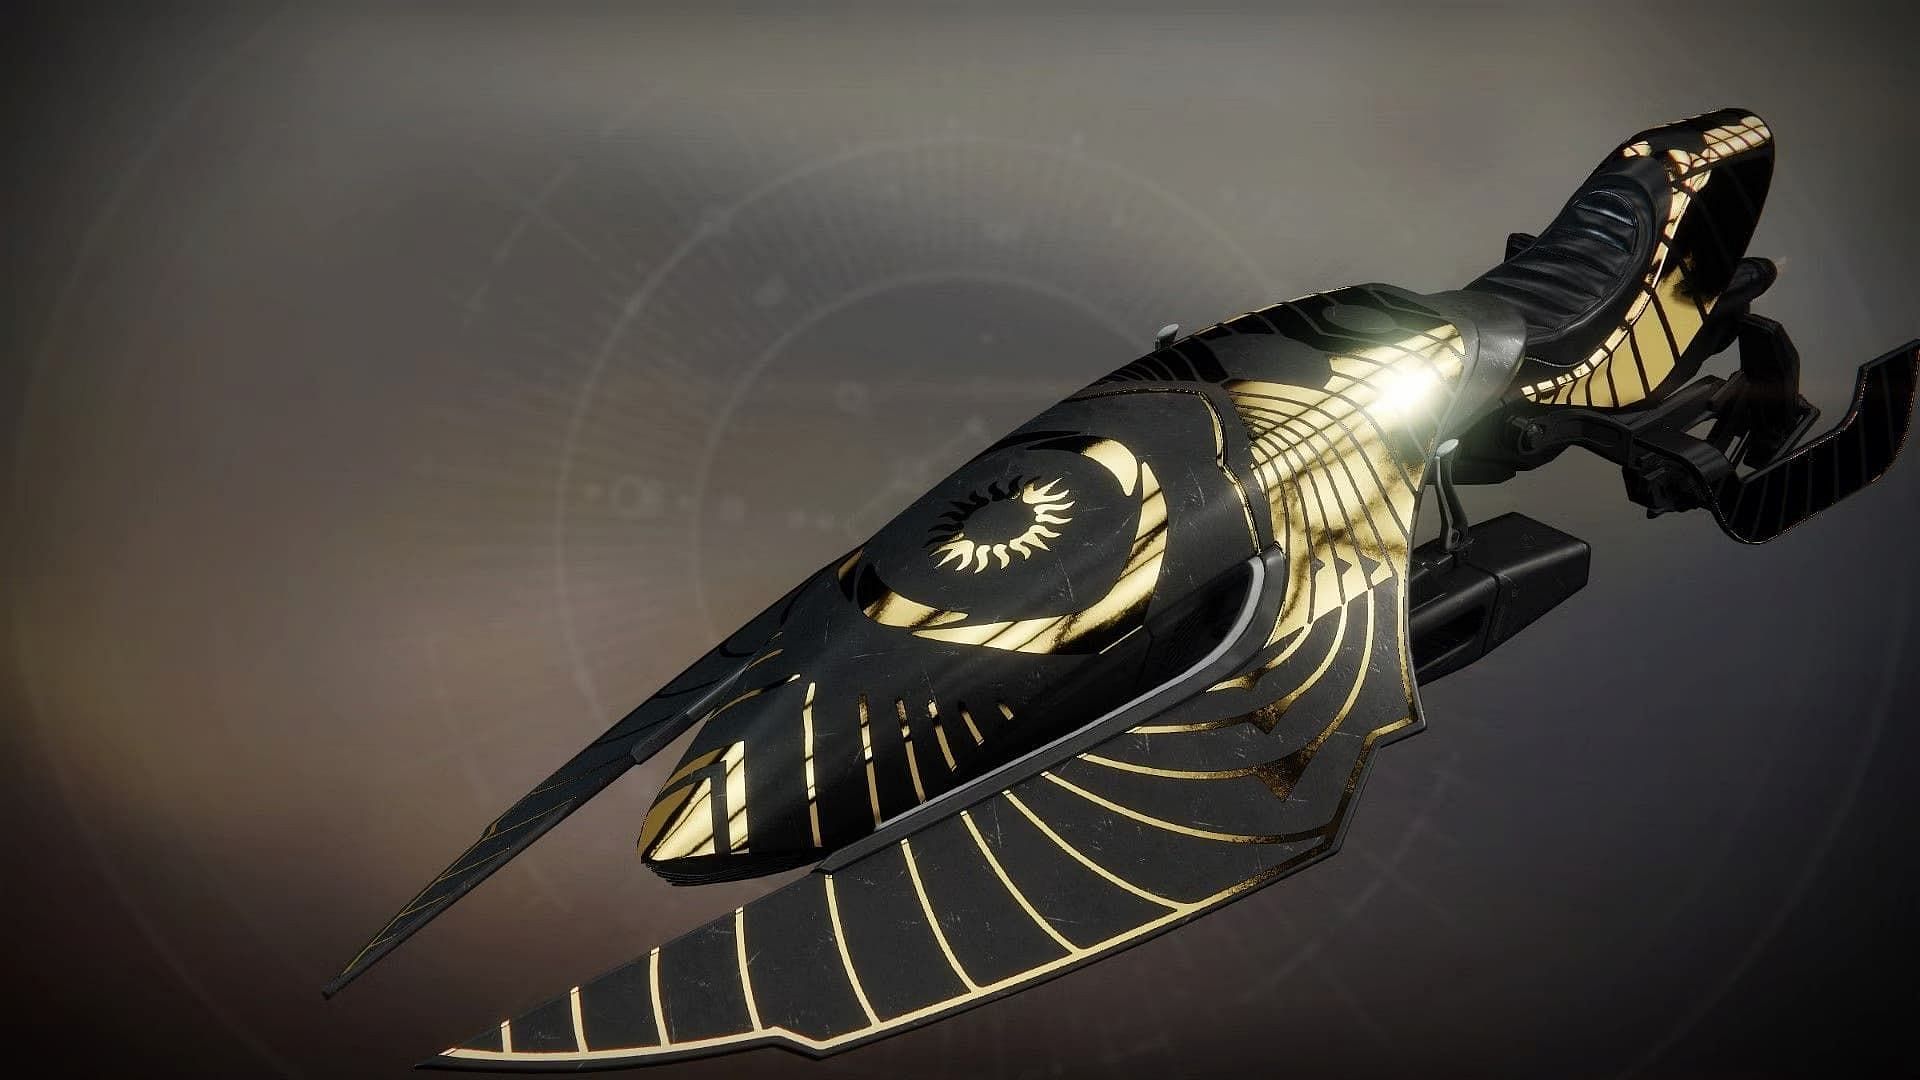 A new bug let players use Sparrows in Destiny 2 Iron Banner (Image via Bungie)